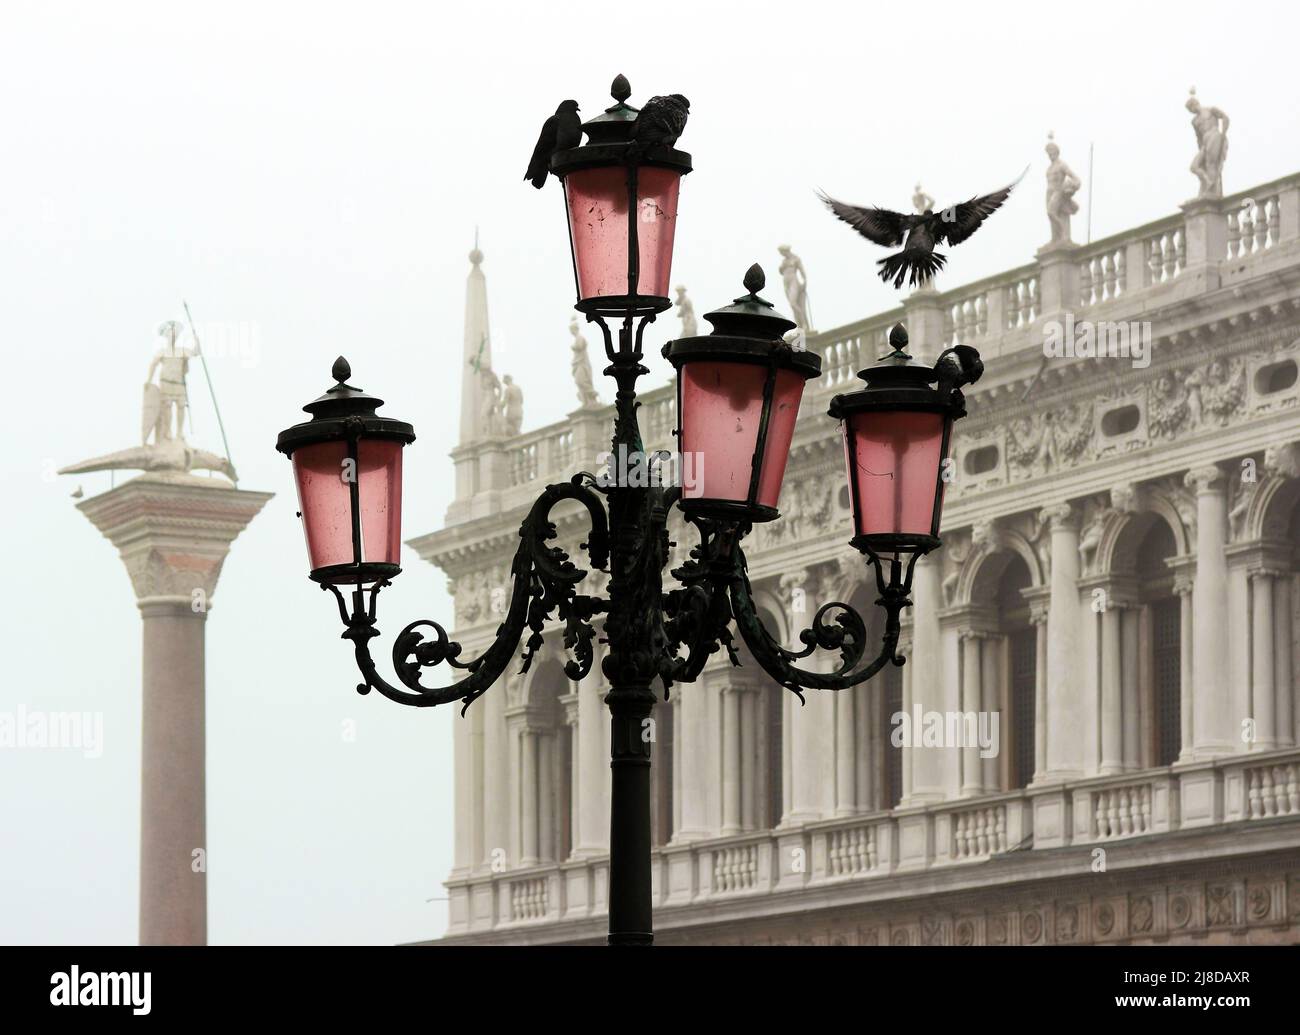 Romantic view of a typical Venetian lamppost with doves. In the background, the Marciana Library and the column of San Teodoro wrapped in mist Stock Photo